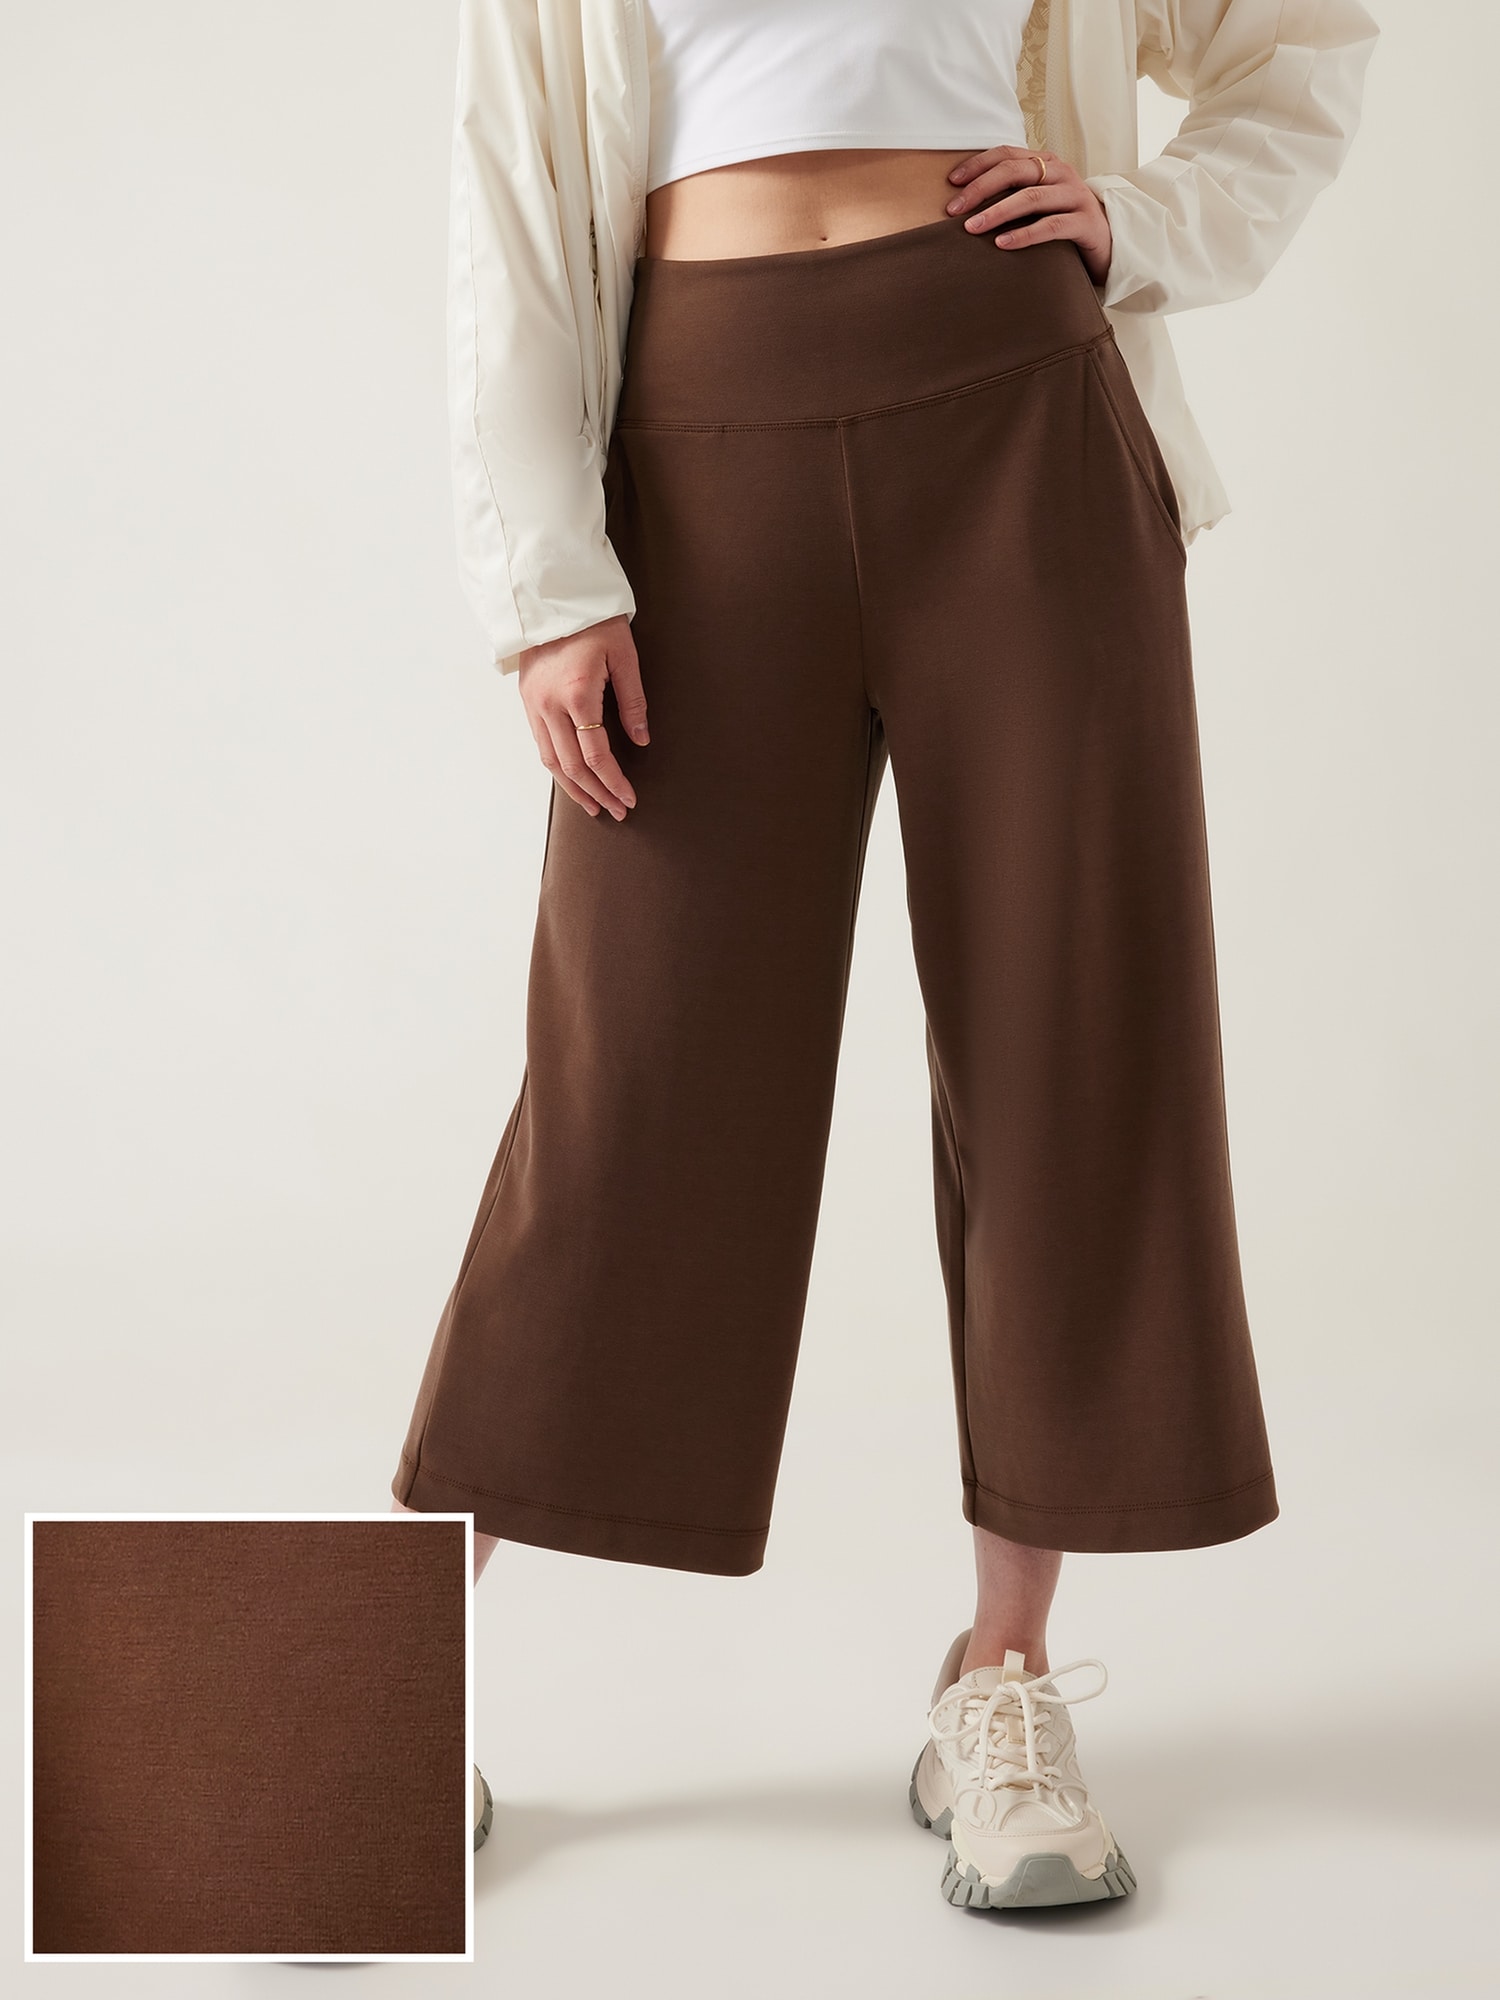 CROPPED CORETTE PANT - CAMEL - Assembly Showroom